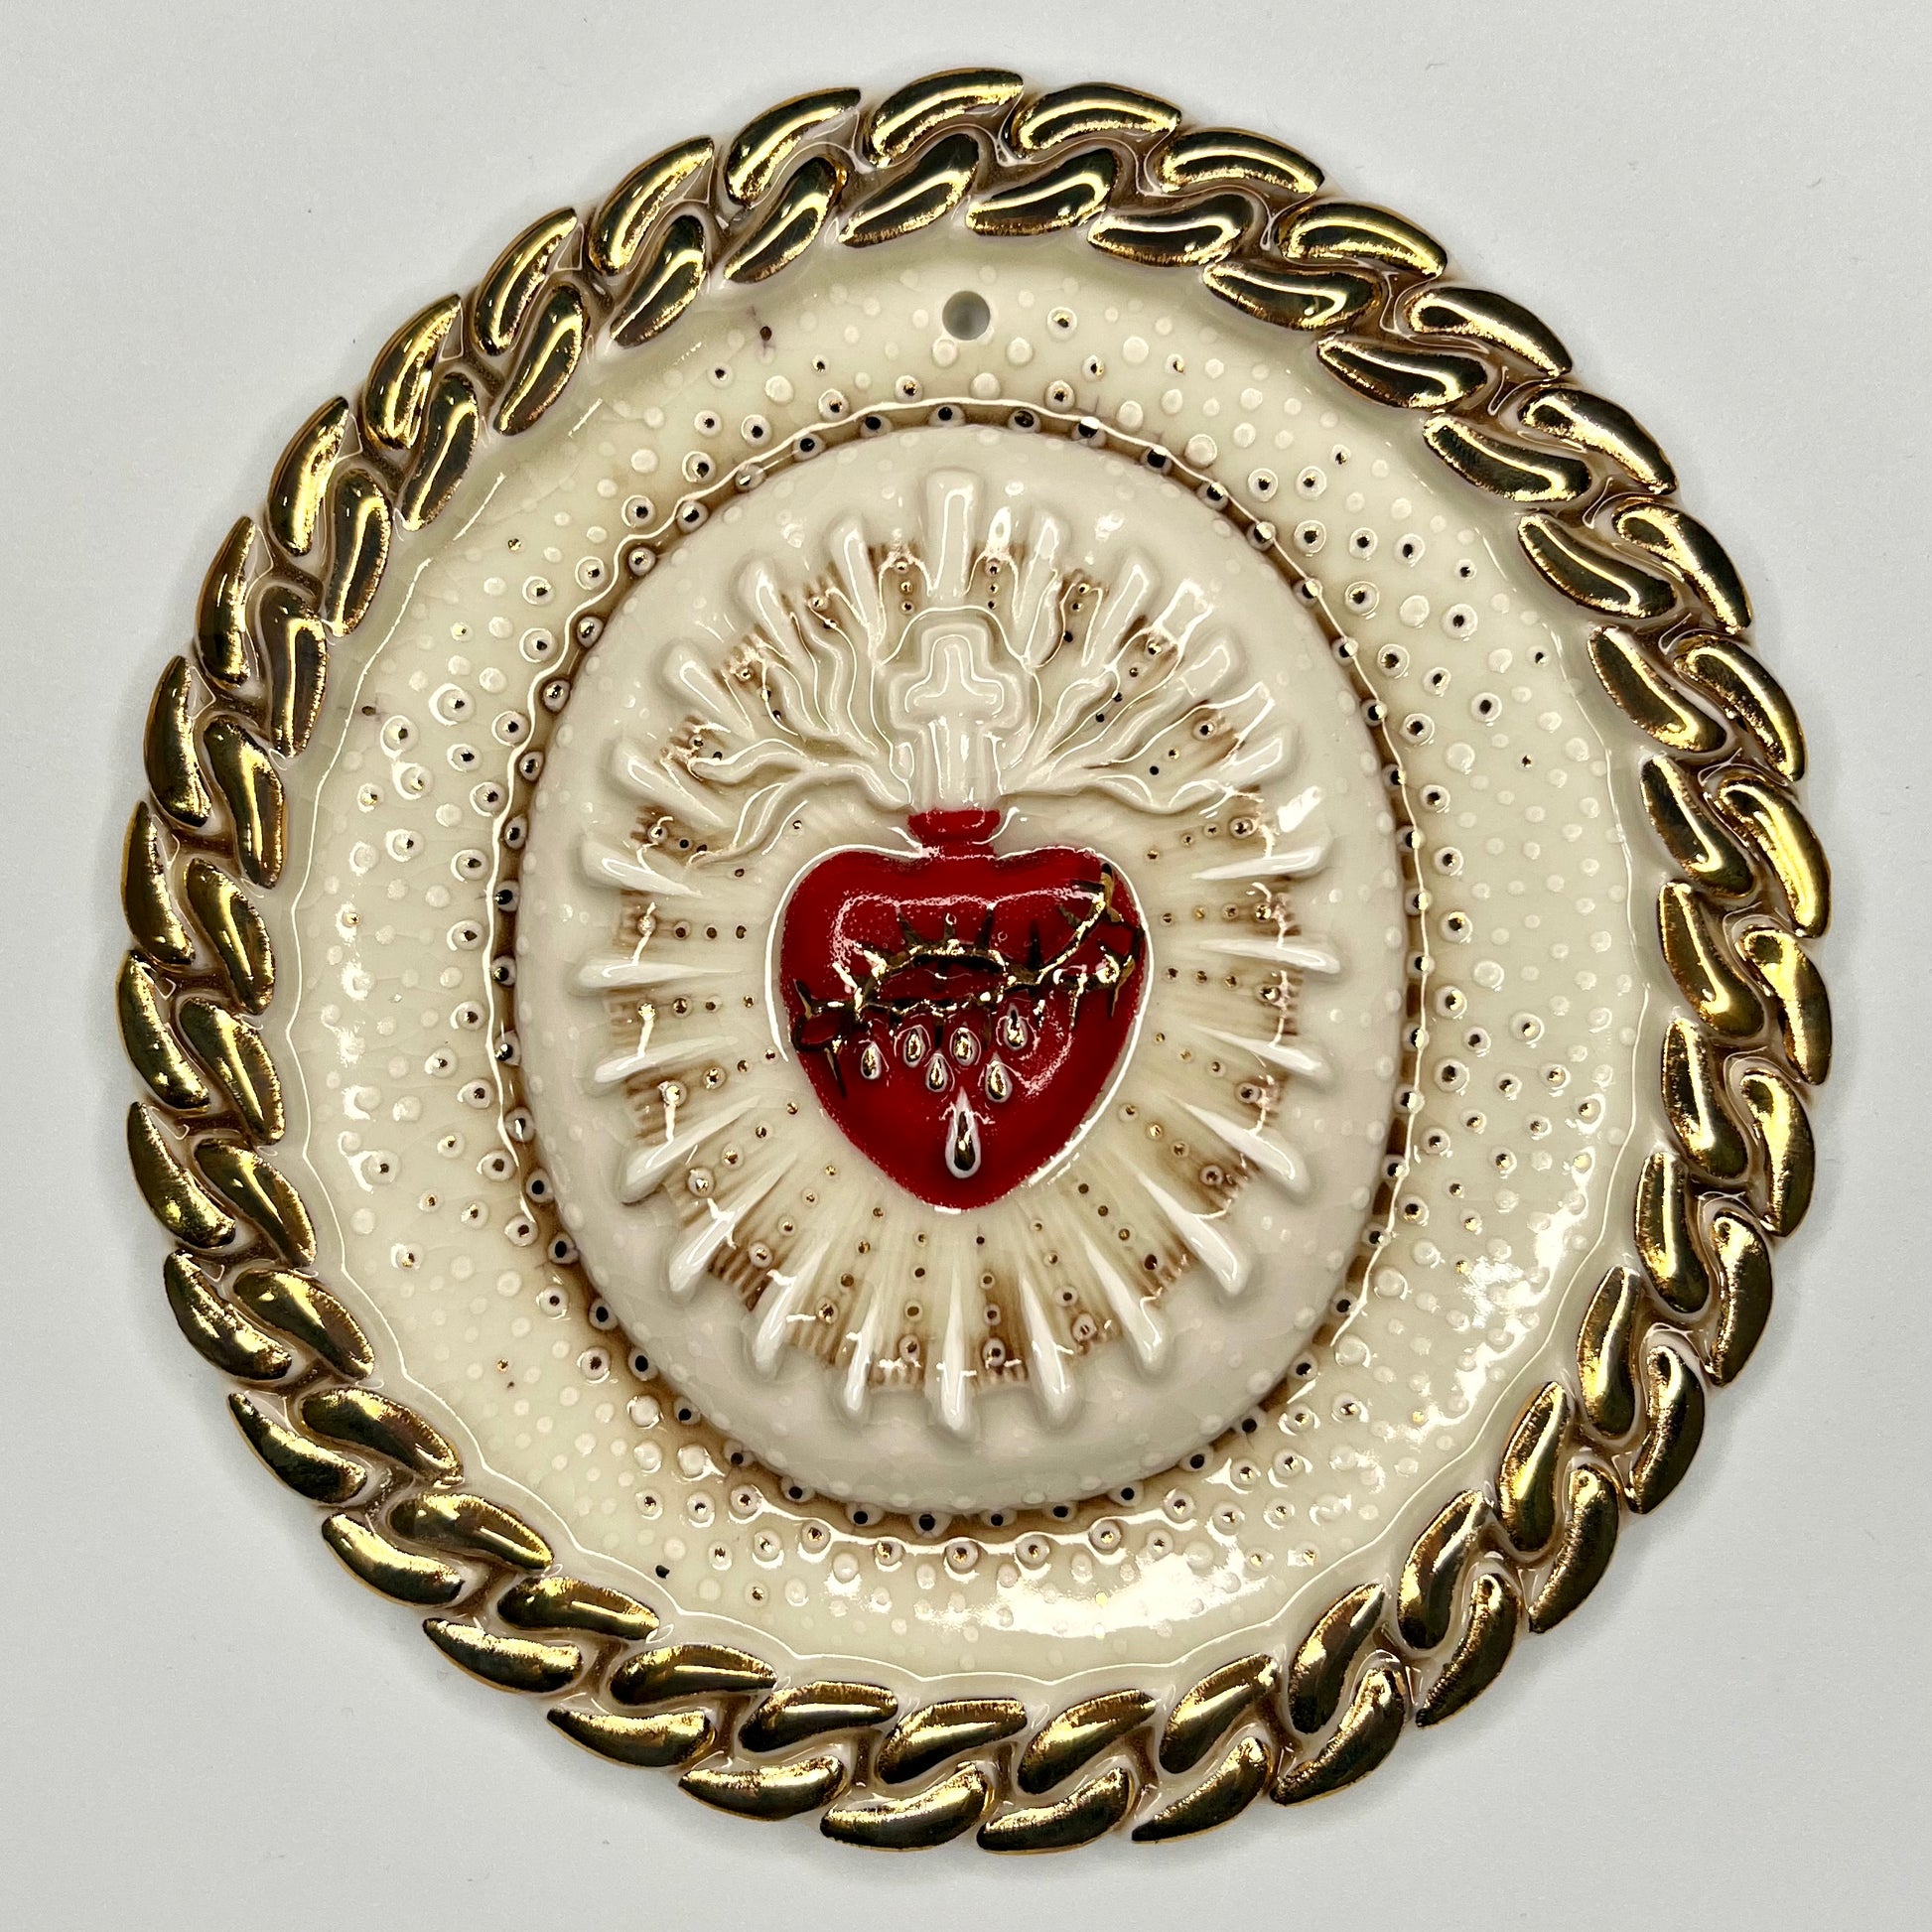 Product Image: Chain Heart 4 -  Hand crafted Porcelain Home Ornament. Red Sacred Heart in thorns surrounded by Chain Design